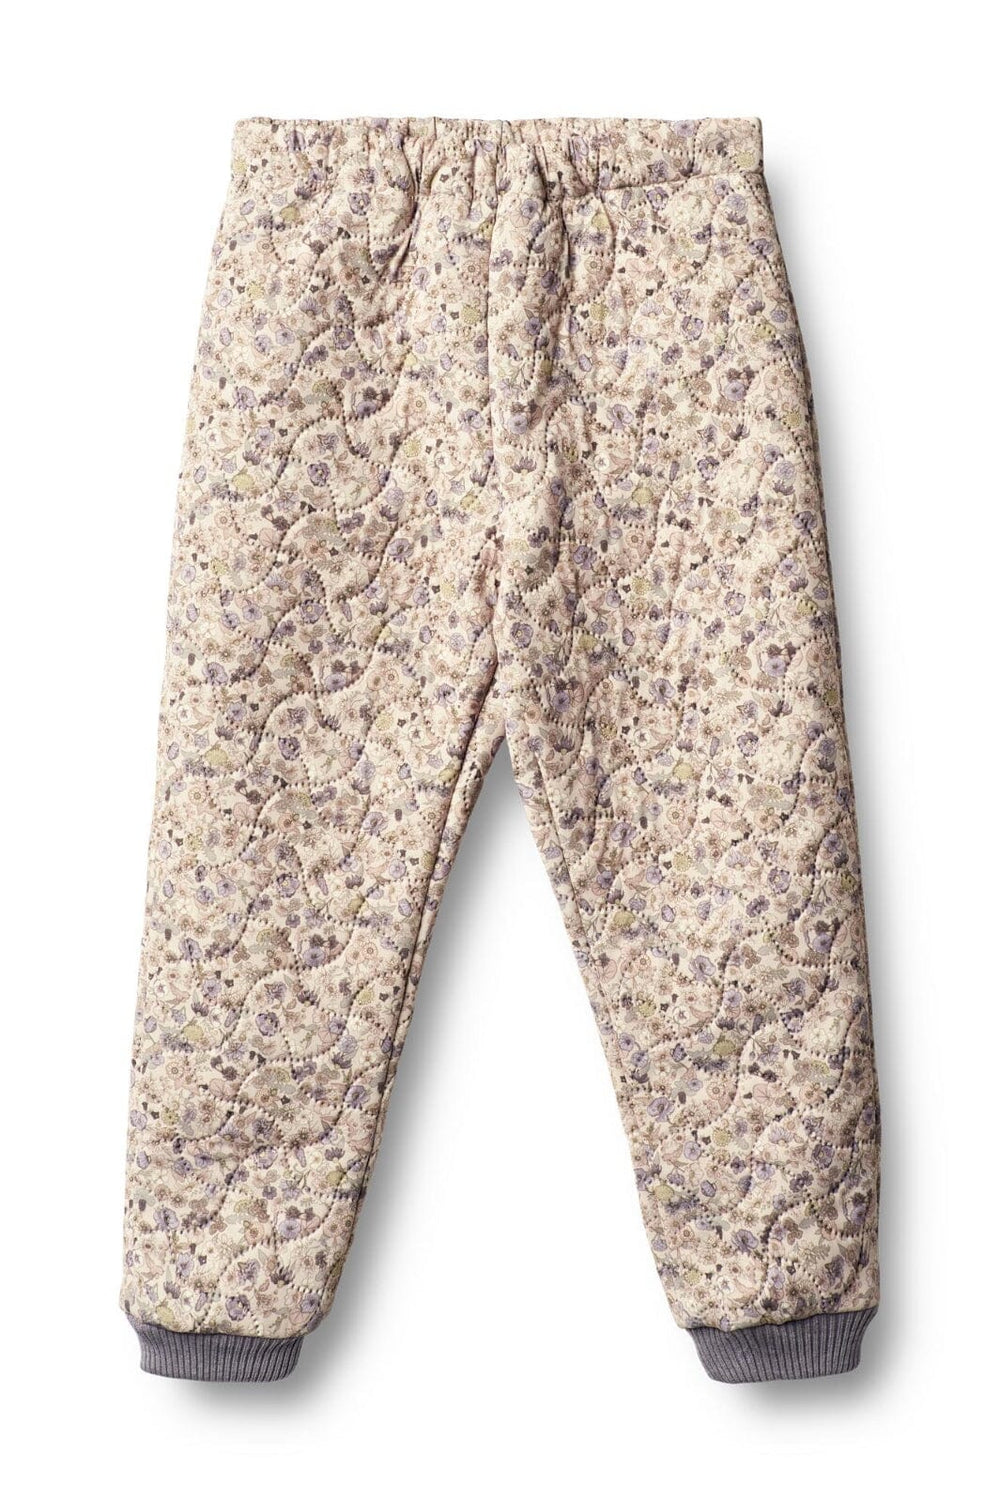 Wheat - Thermo Pants Alex - 3189 clam flower field Termobukser 